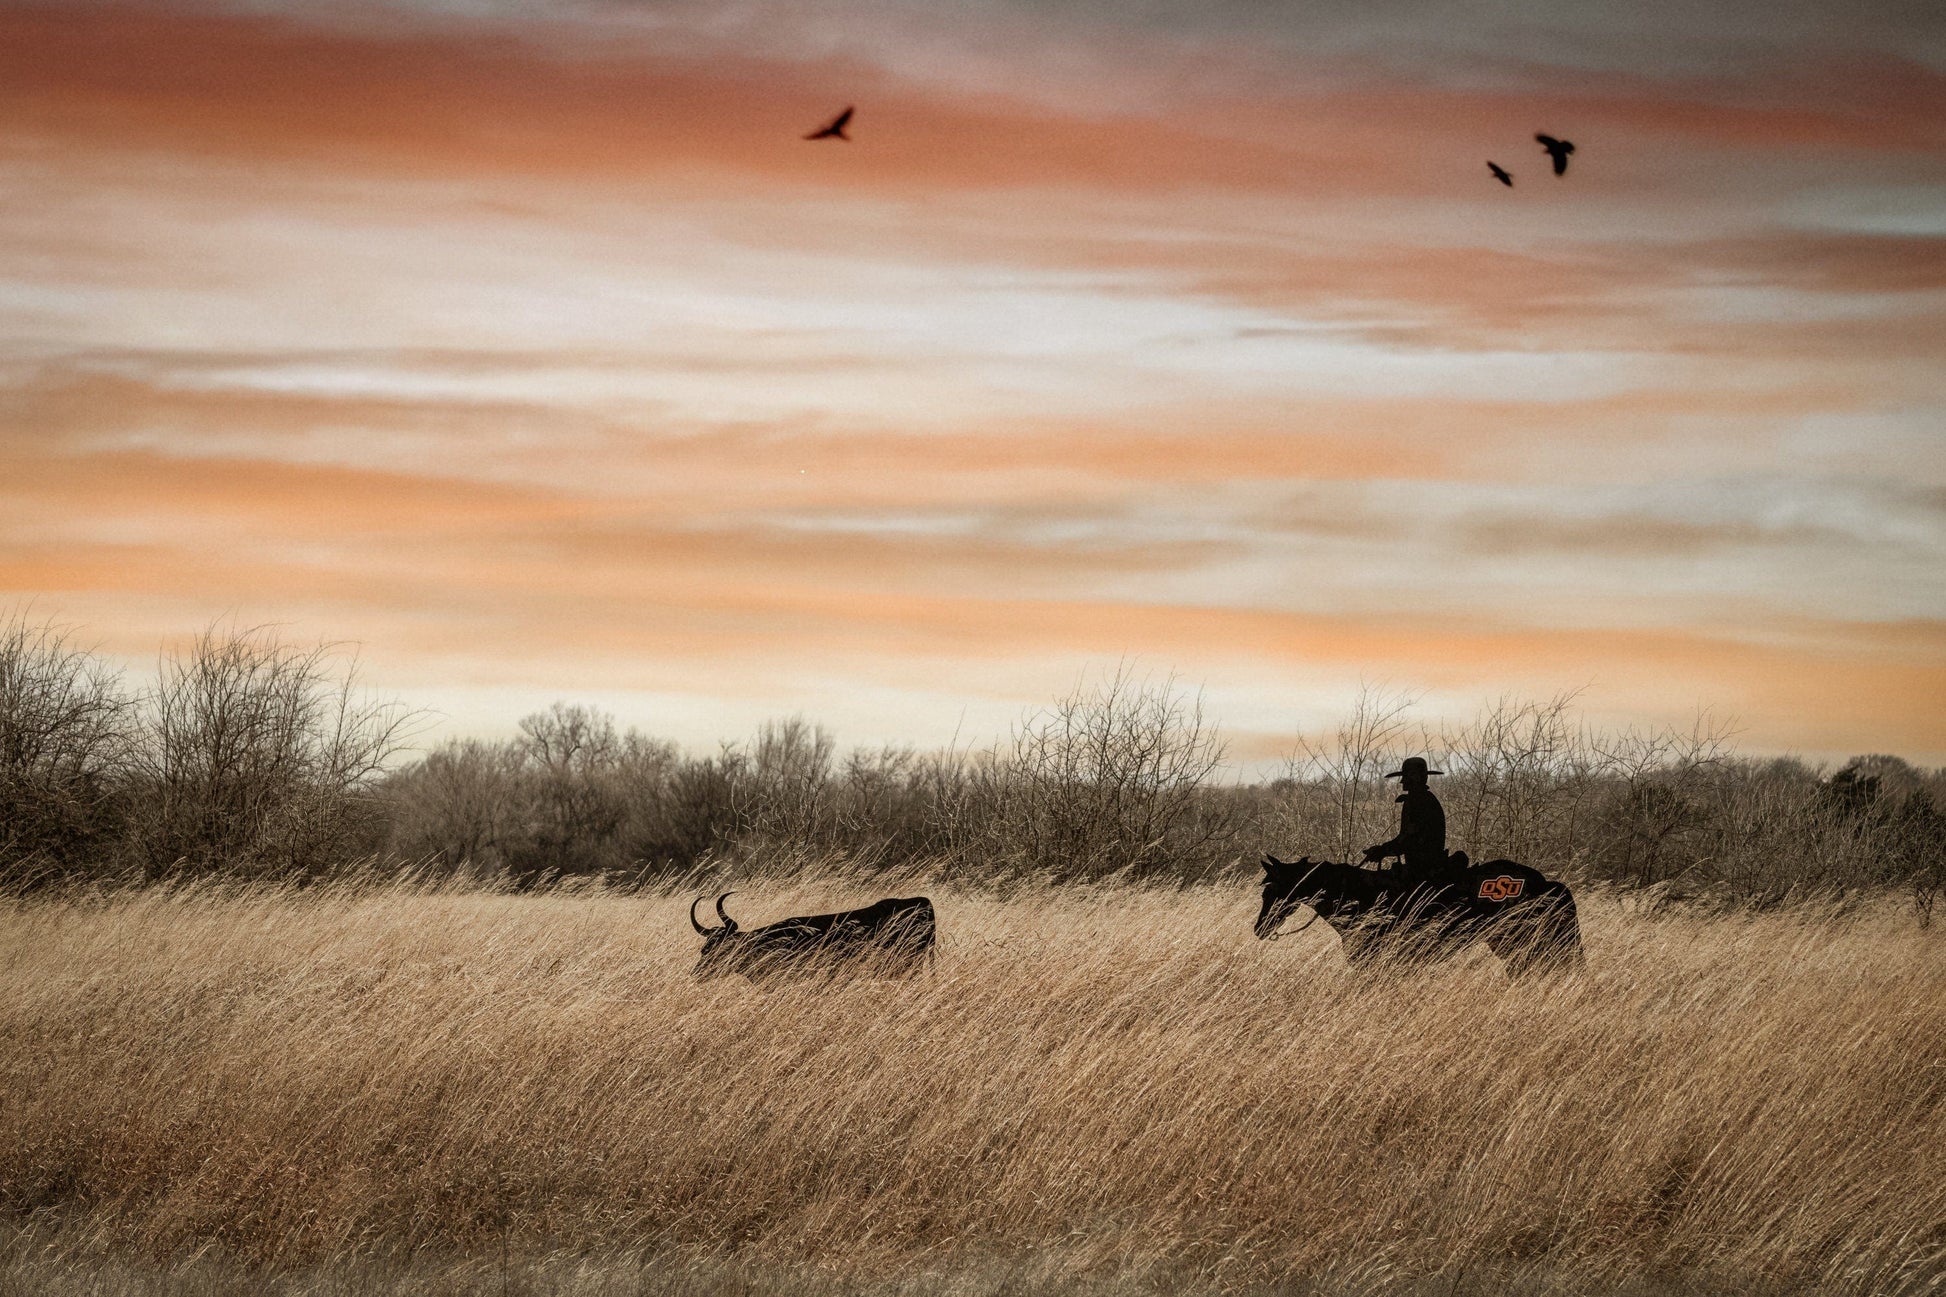 Teri James Photography Wall Art Paper Photo Print / 12 x 18 Inches Oklahoma State University - Cowboy, Horse and Longhorn